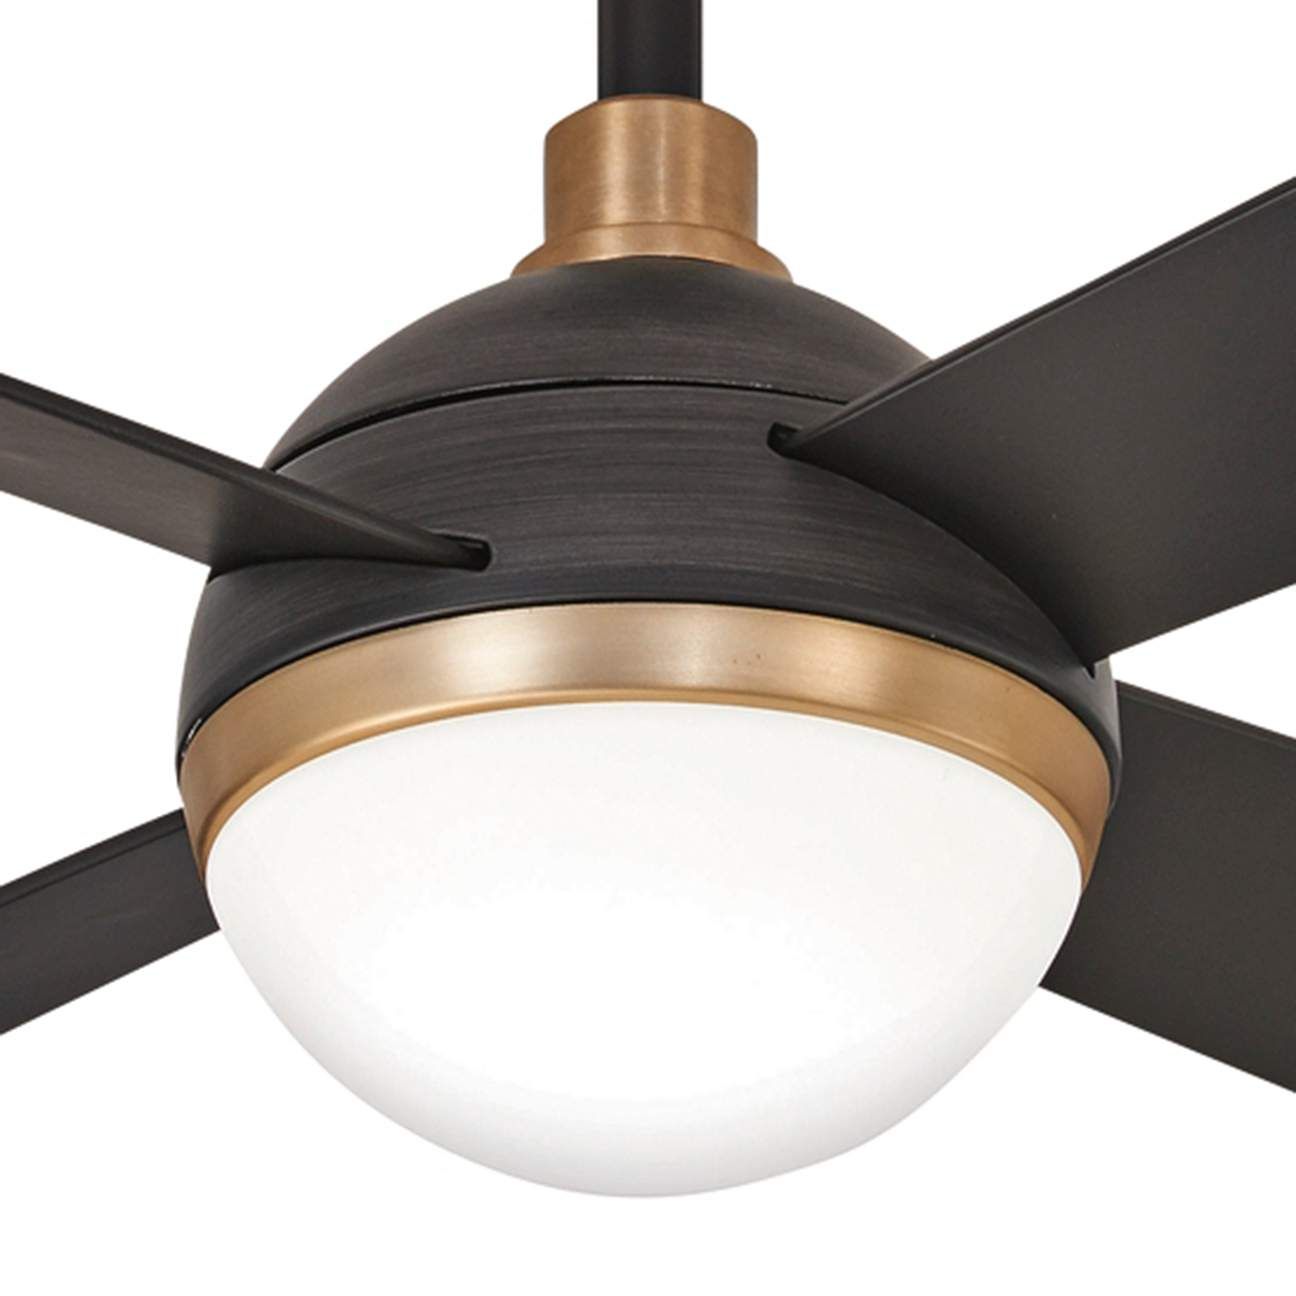 54" Minka Aire Orb Brushed Carbon LED Ceiling Fan with Remote Control | Lamps Plus